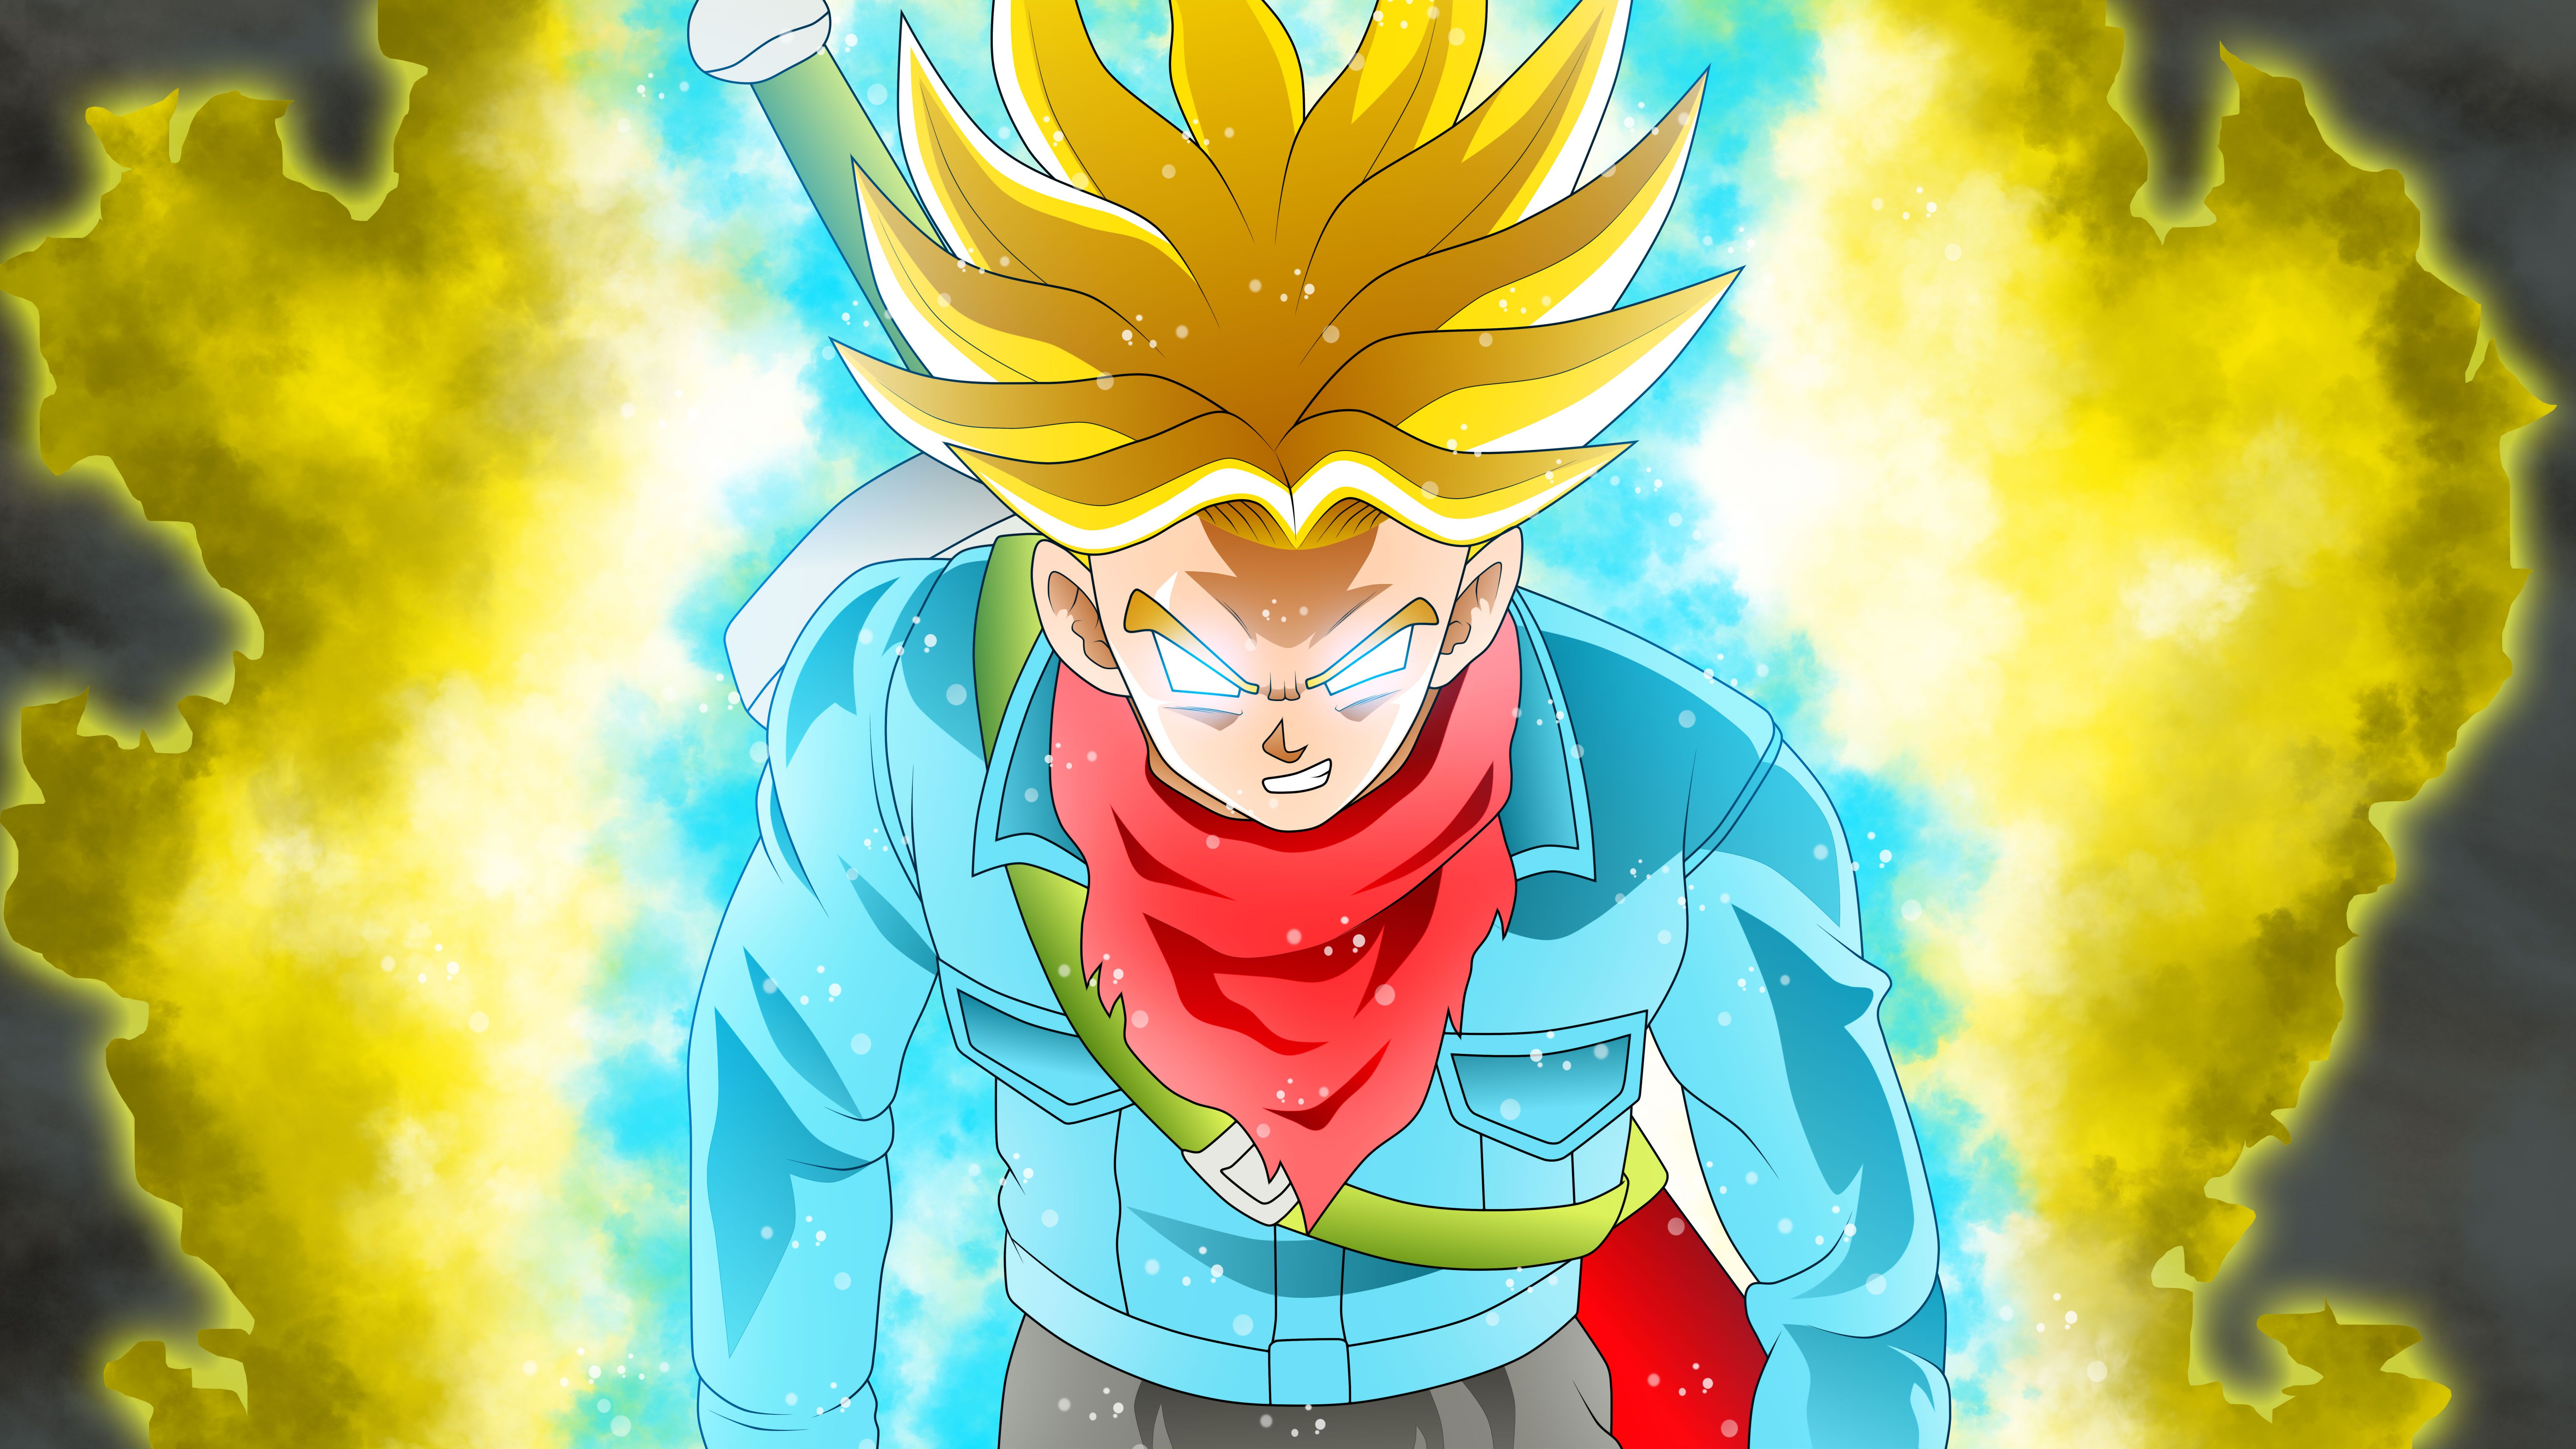 Trunks Dragon Ball Super, HD Anime, 4k Wallpapers, Image, Backgrounds, Phot...